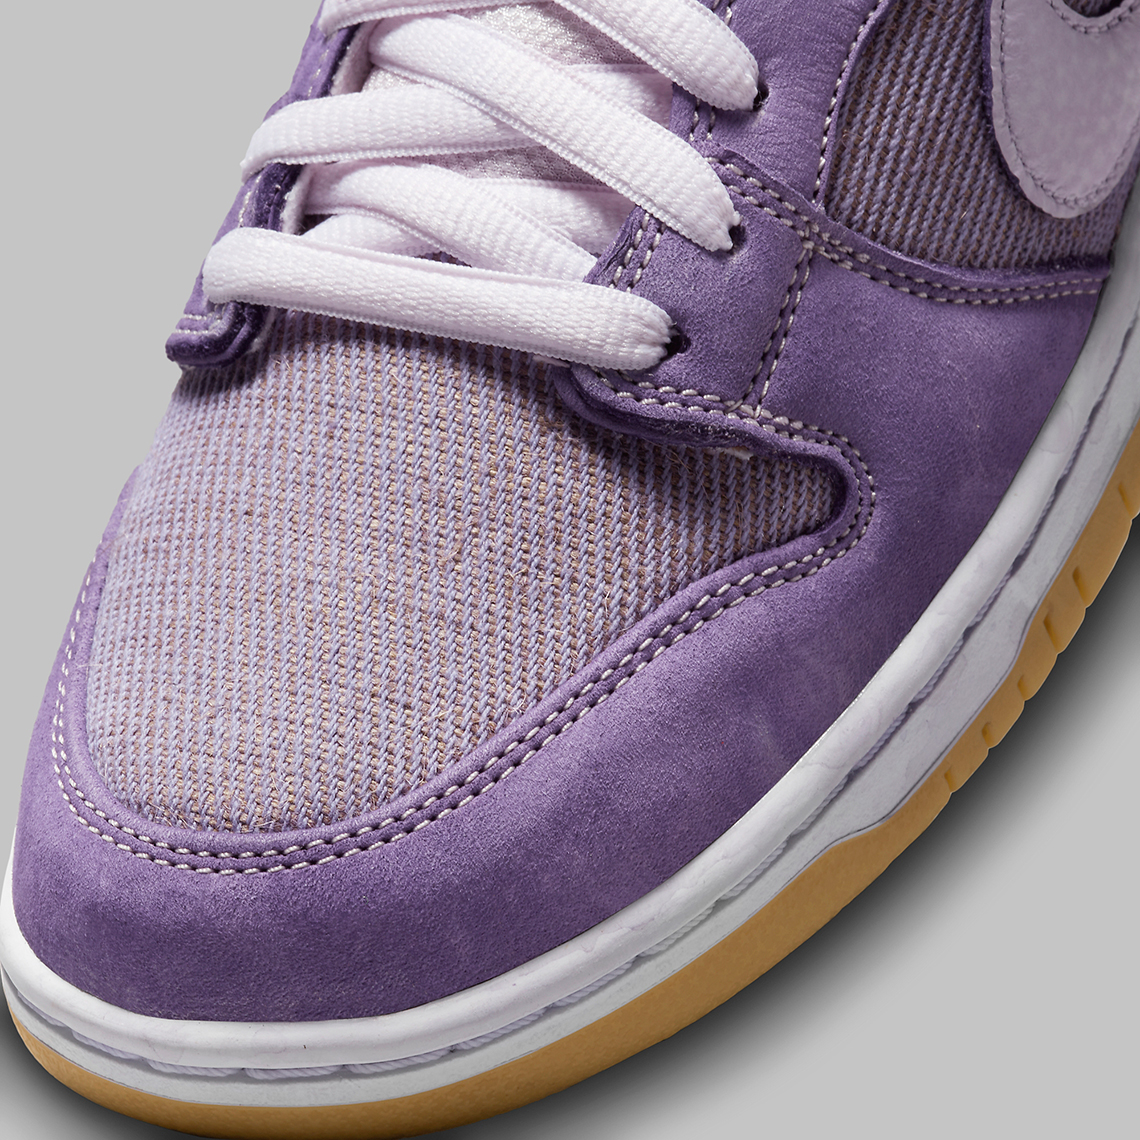 Nike SB Dunk Low Unbleached Pack